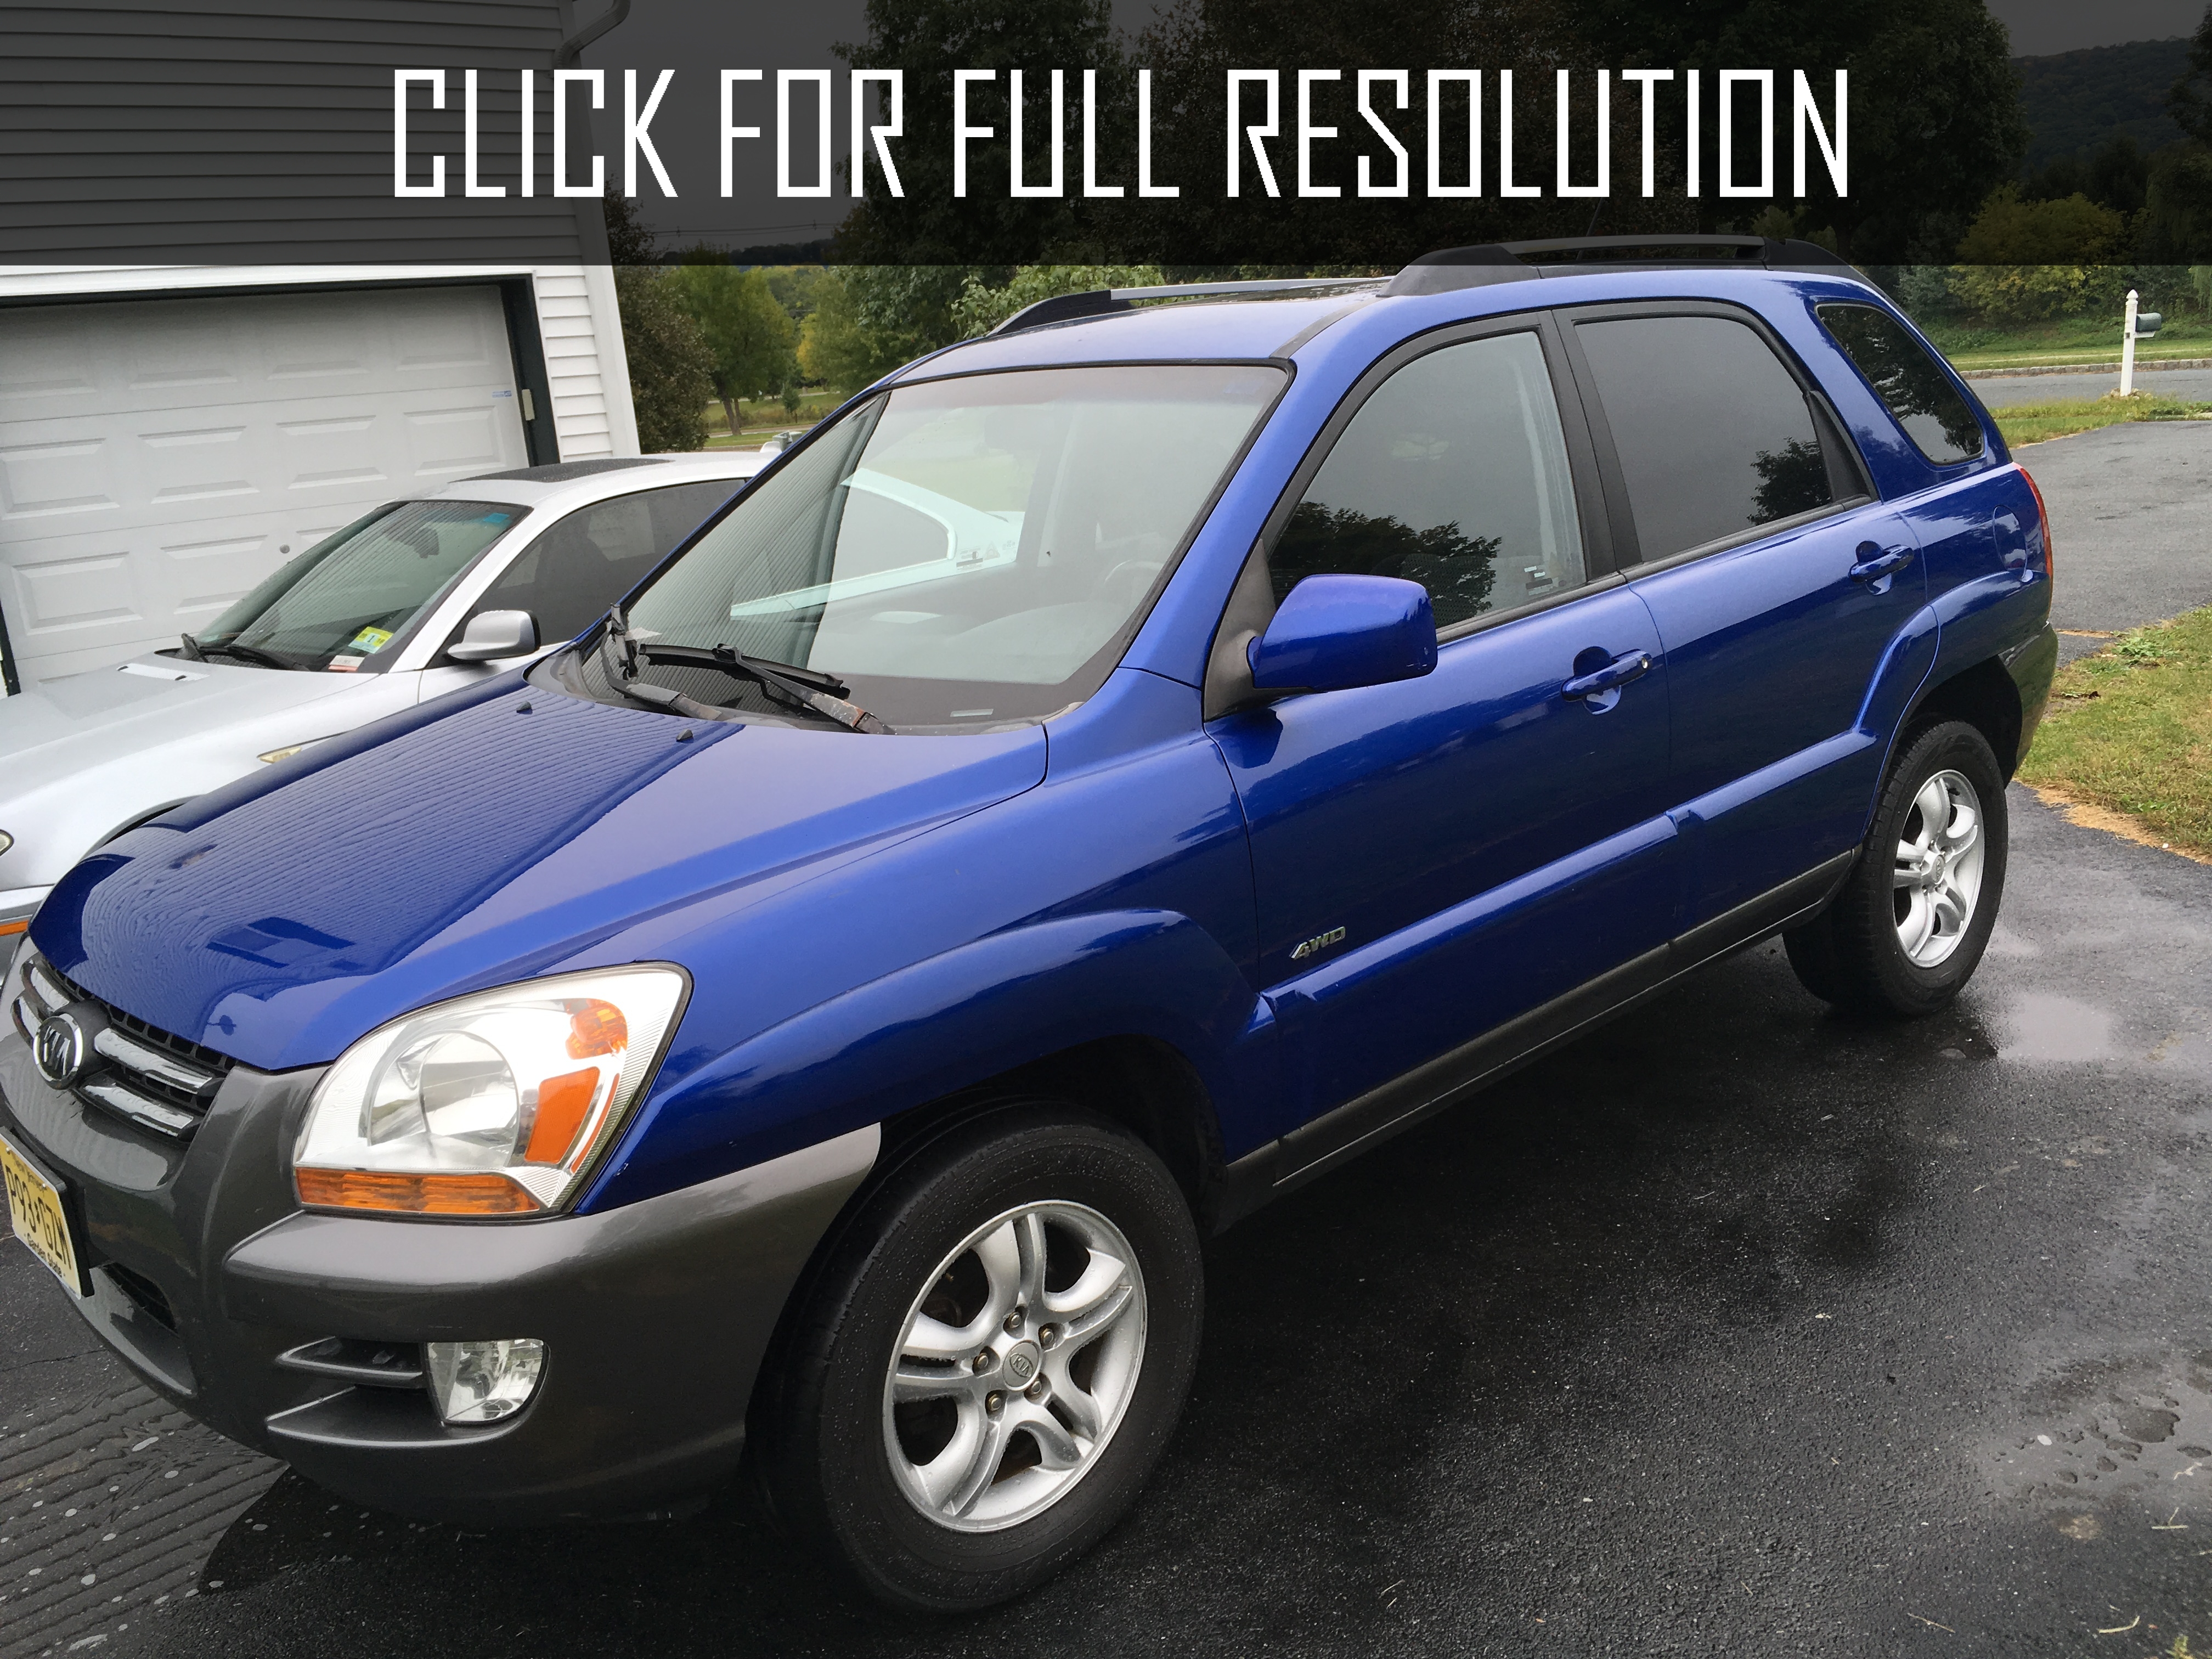 2005 Kia Sportage 4x4 news, reviews, msrp, ratings with